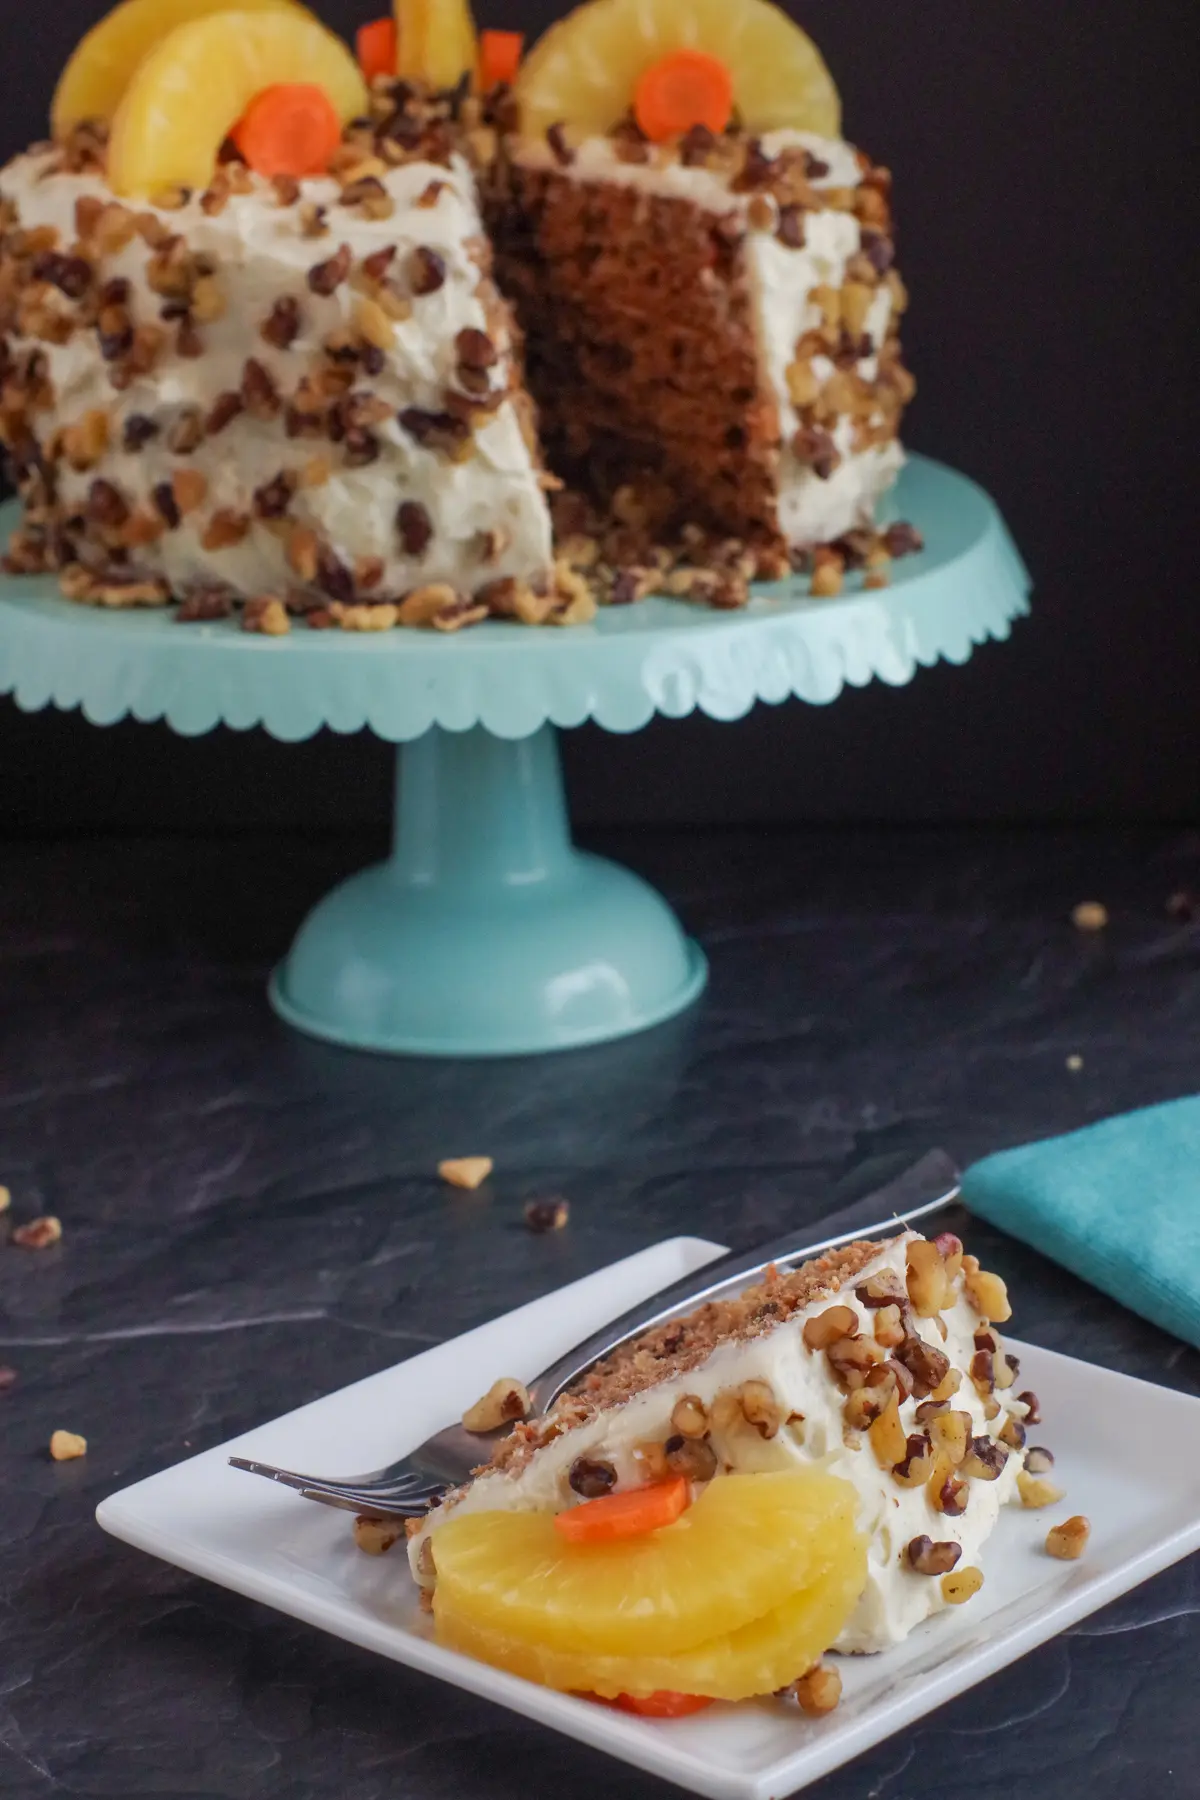 healthy and light carrot cake on a aqua cake stand in background with slice of cake on a white plate in front